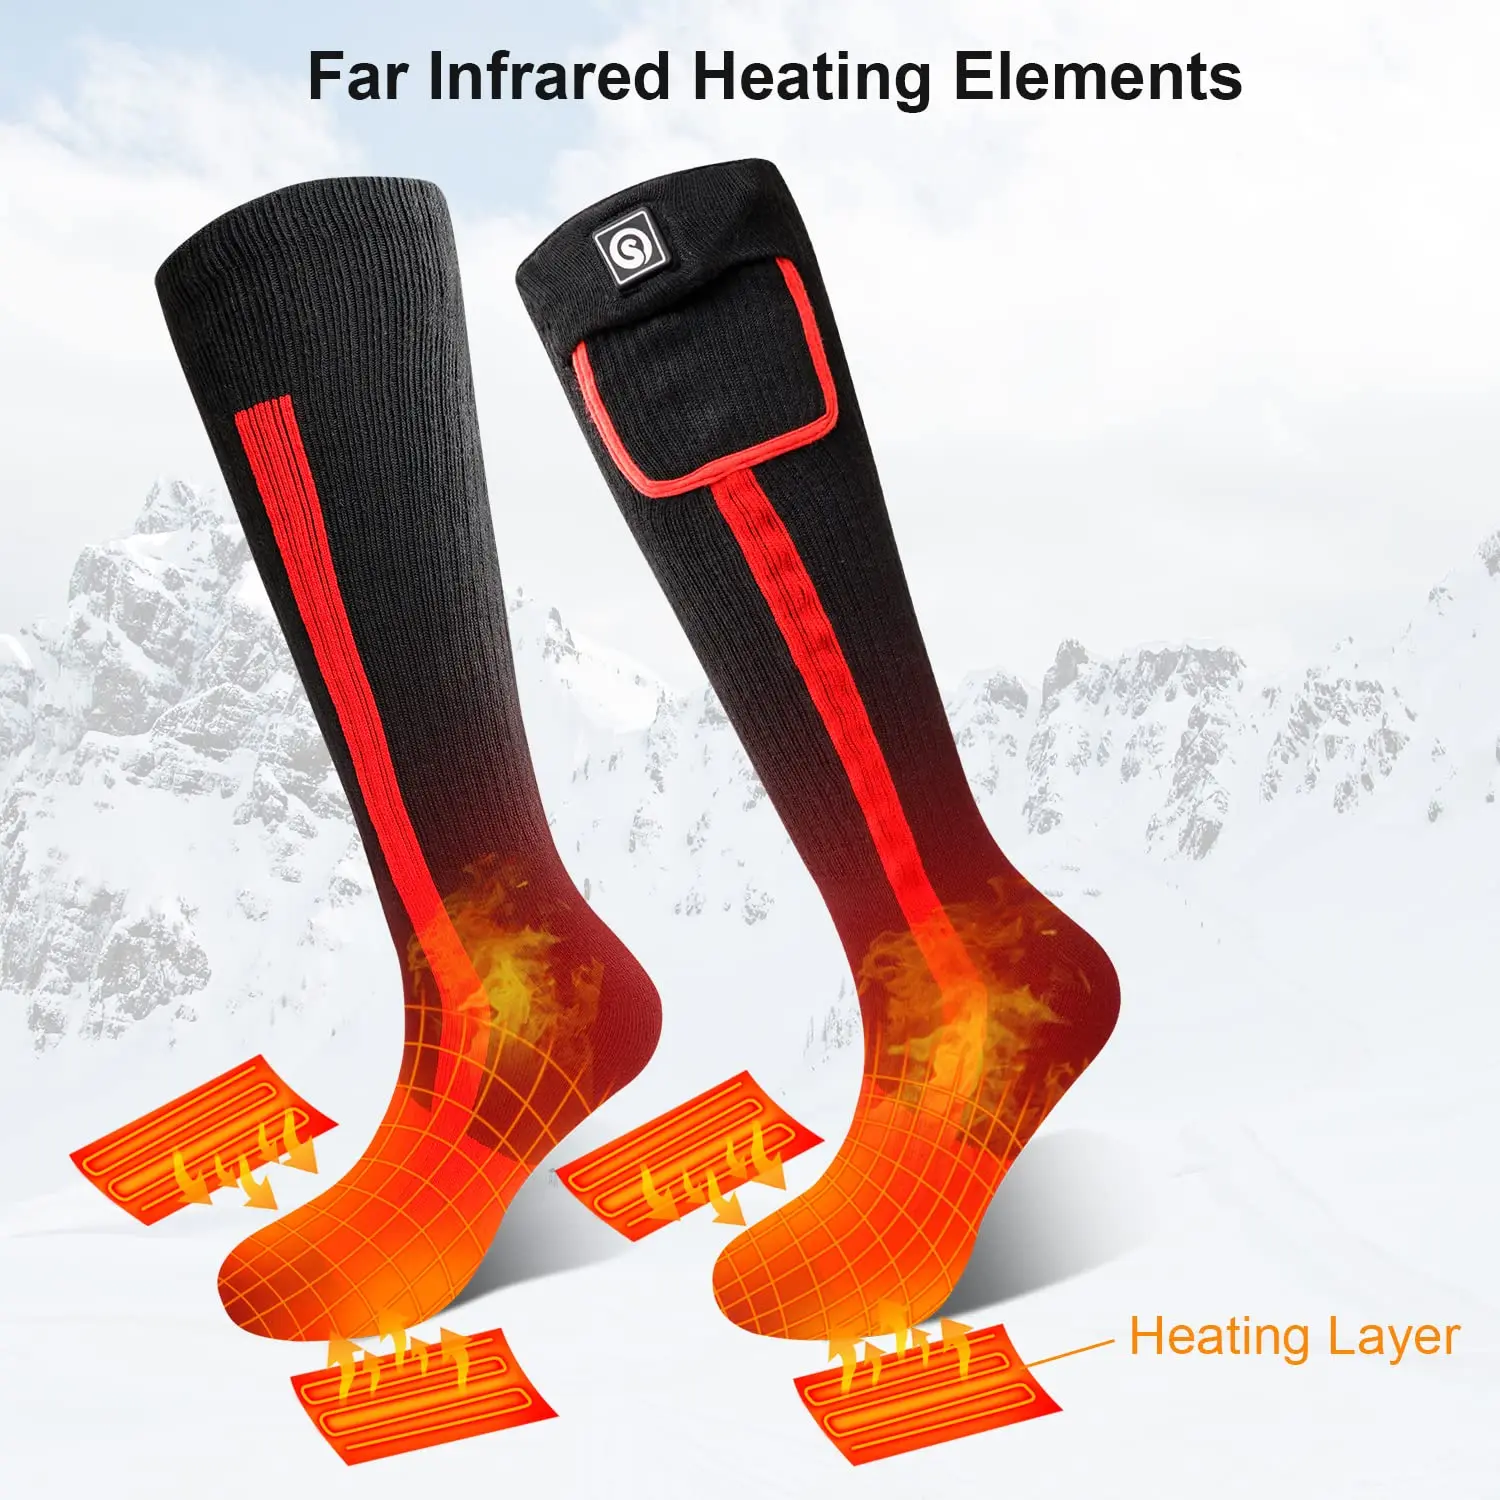 Battery Powered Cold Weather Heat Socks for Men Women,Outdoor Riding Camping Hiking Motorcycle Skiing Warm Winter Socks